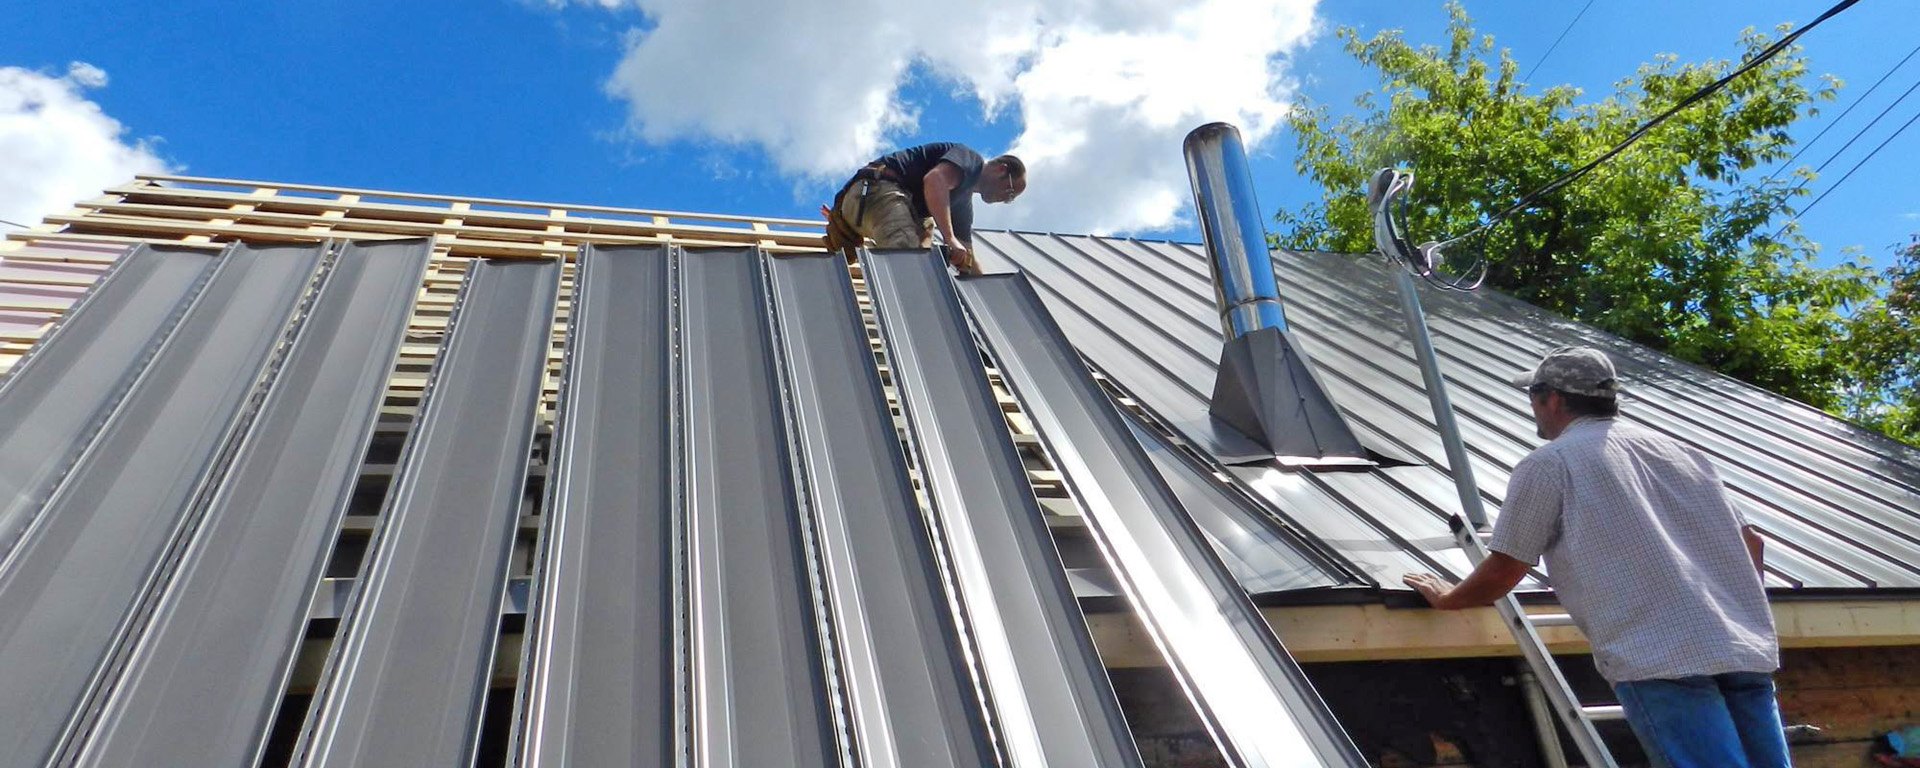 Two men installing metal panels on a roof 